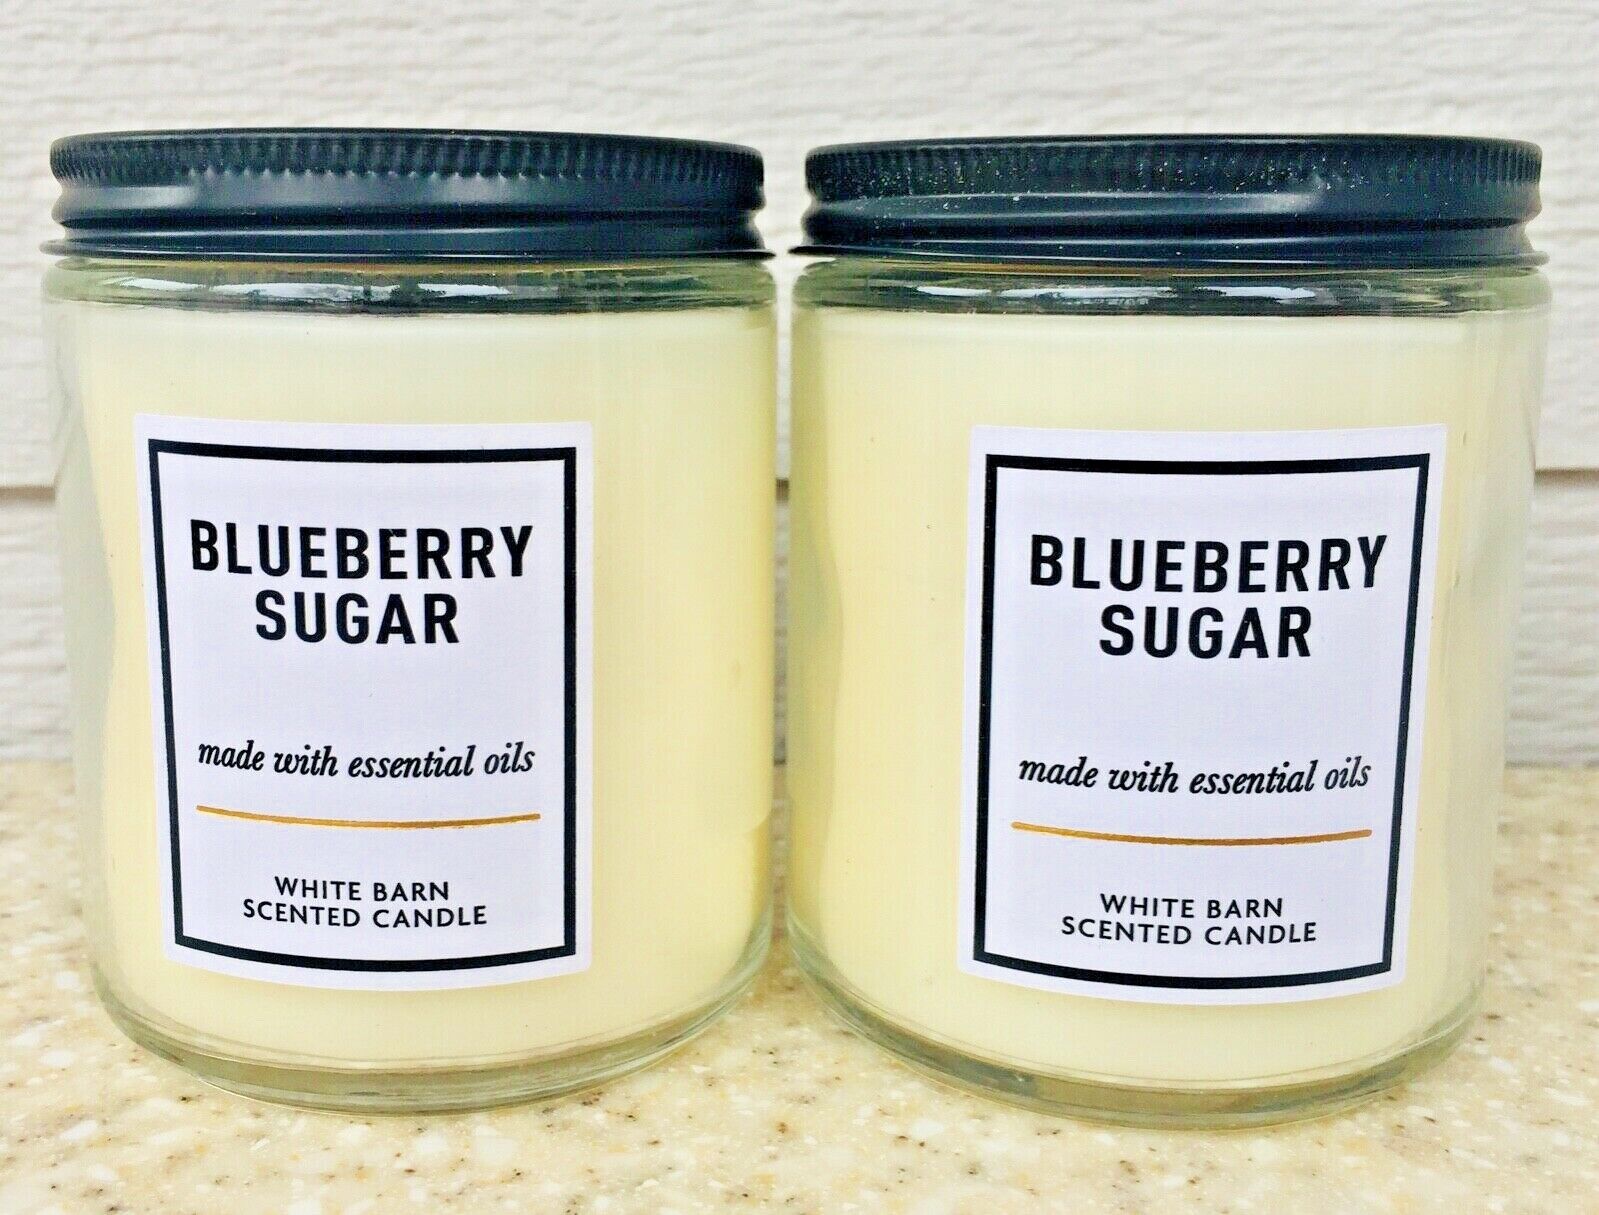 2 BLUEBERRY SUGAR Single Wick 7oz Scented Candle LOT of x2 White Barn